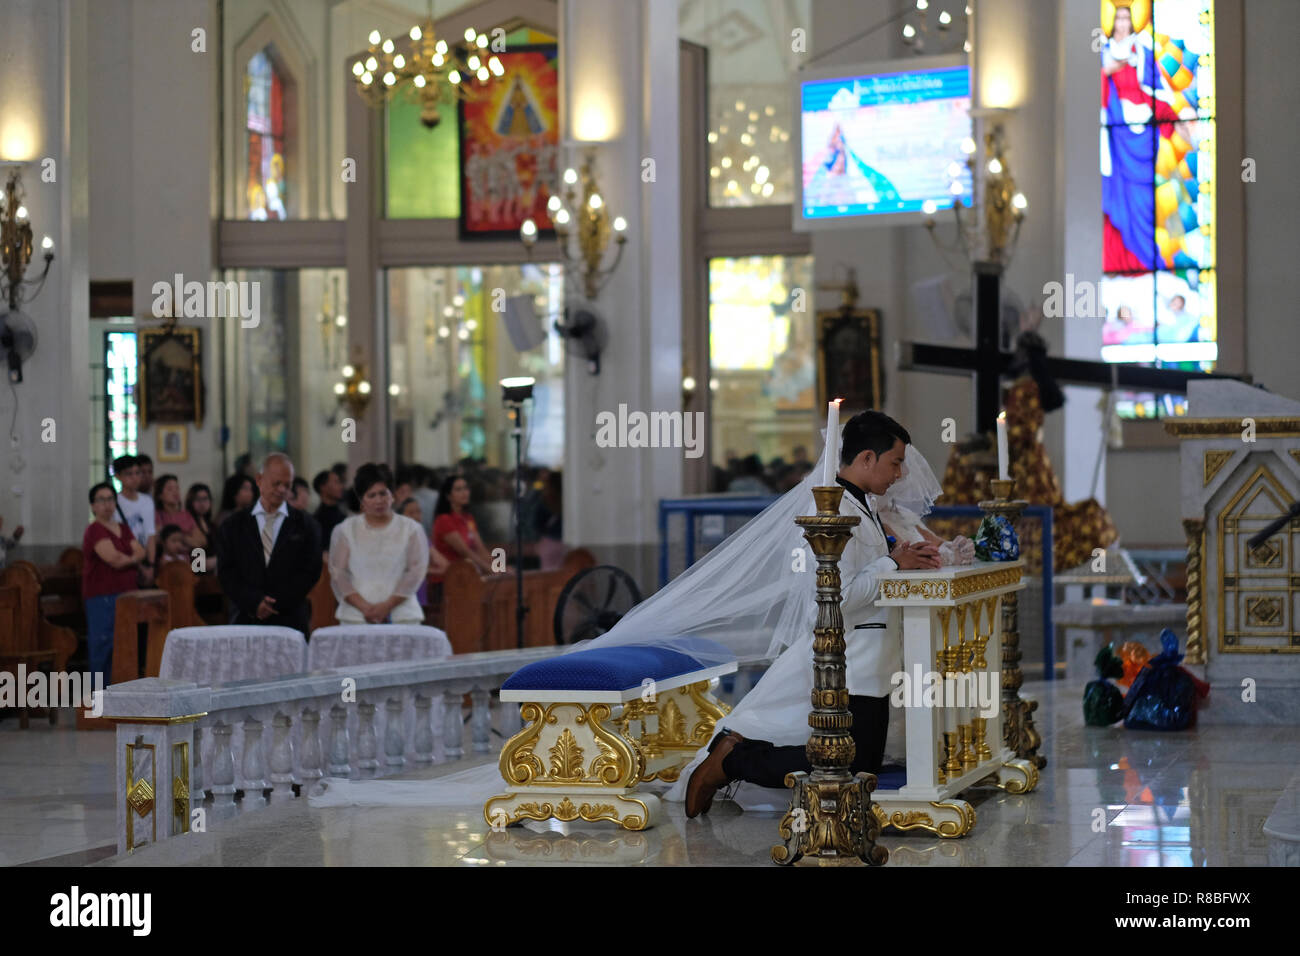 Wedding ceremony inside the Roman Catholic Antipolo Cathedral or National Shrine of Our Lady of Peace and Good Voyage located in the city of Antipolo, in the province of Rizal in the Philippines. Stock Photo